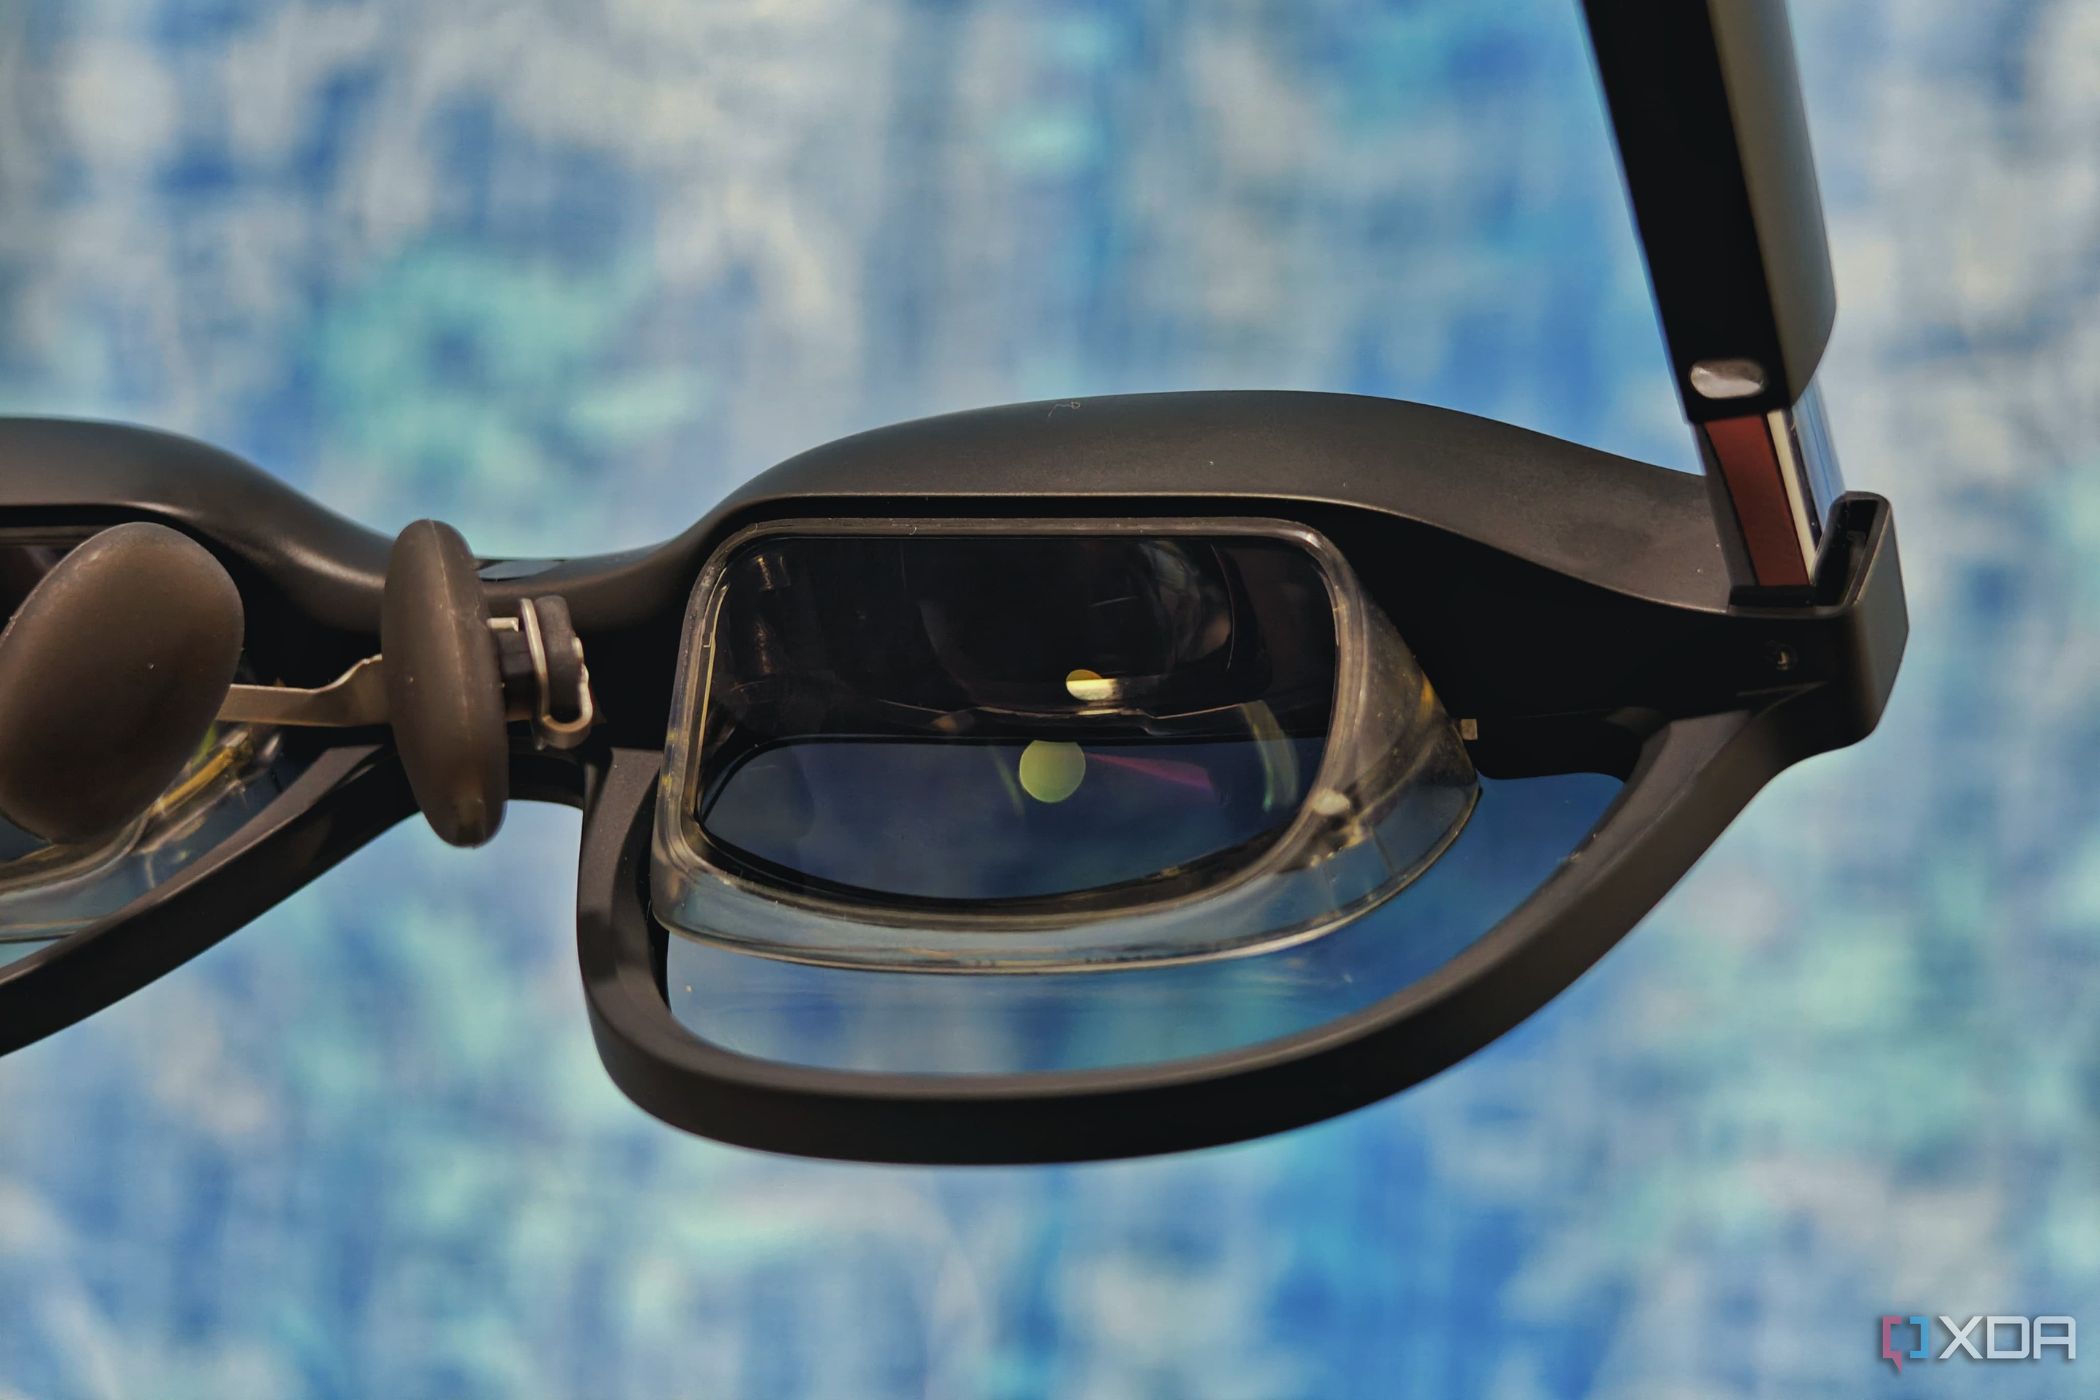 An image showing the display of XREAL Air 2 AR glasses.